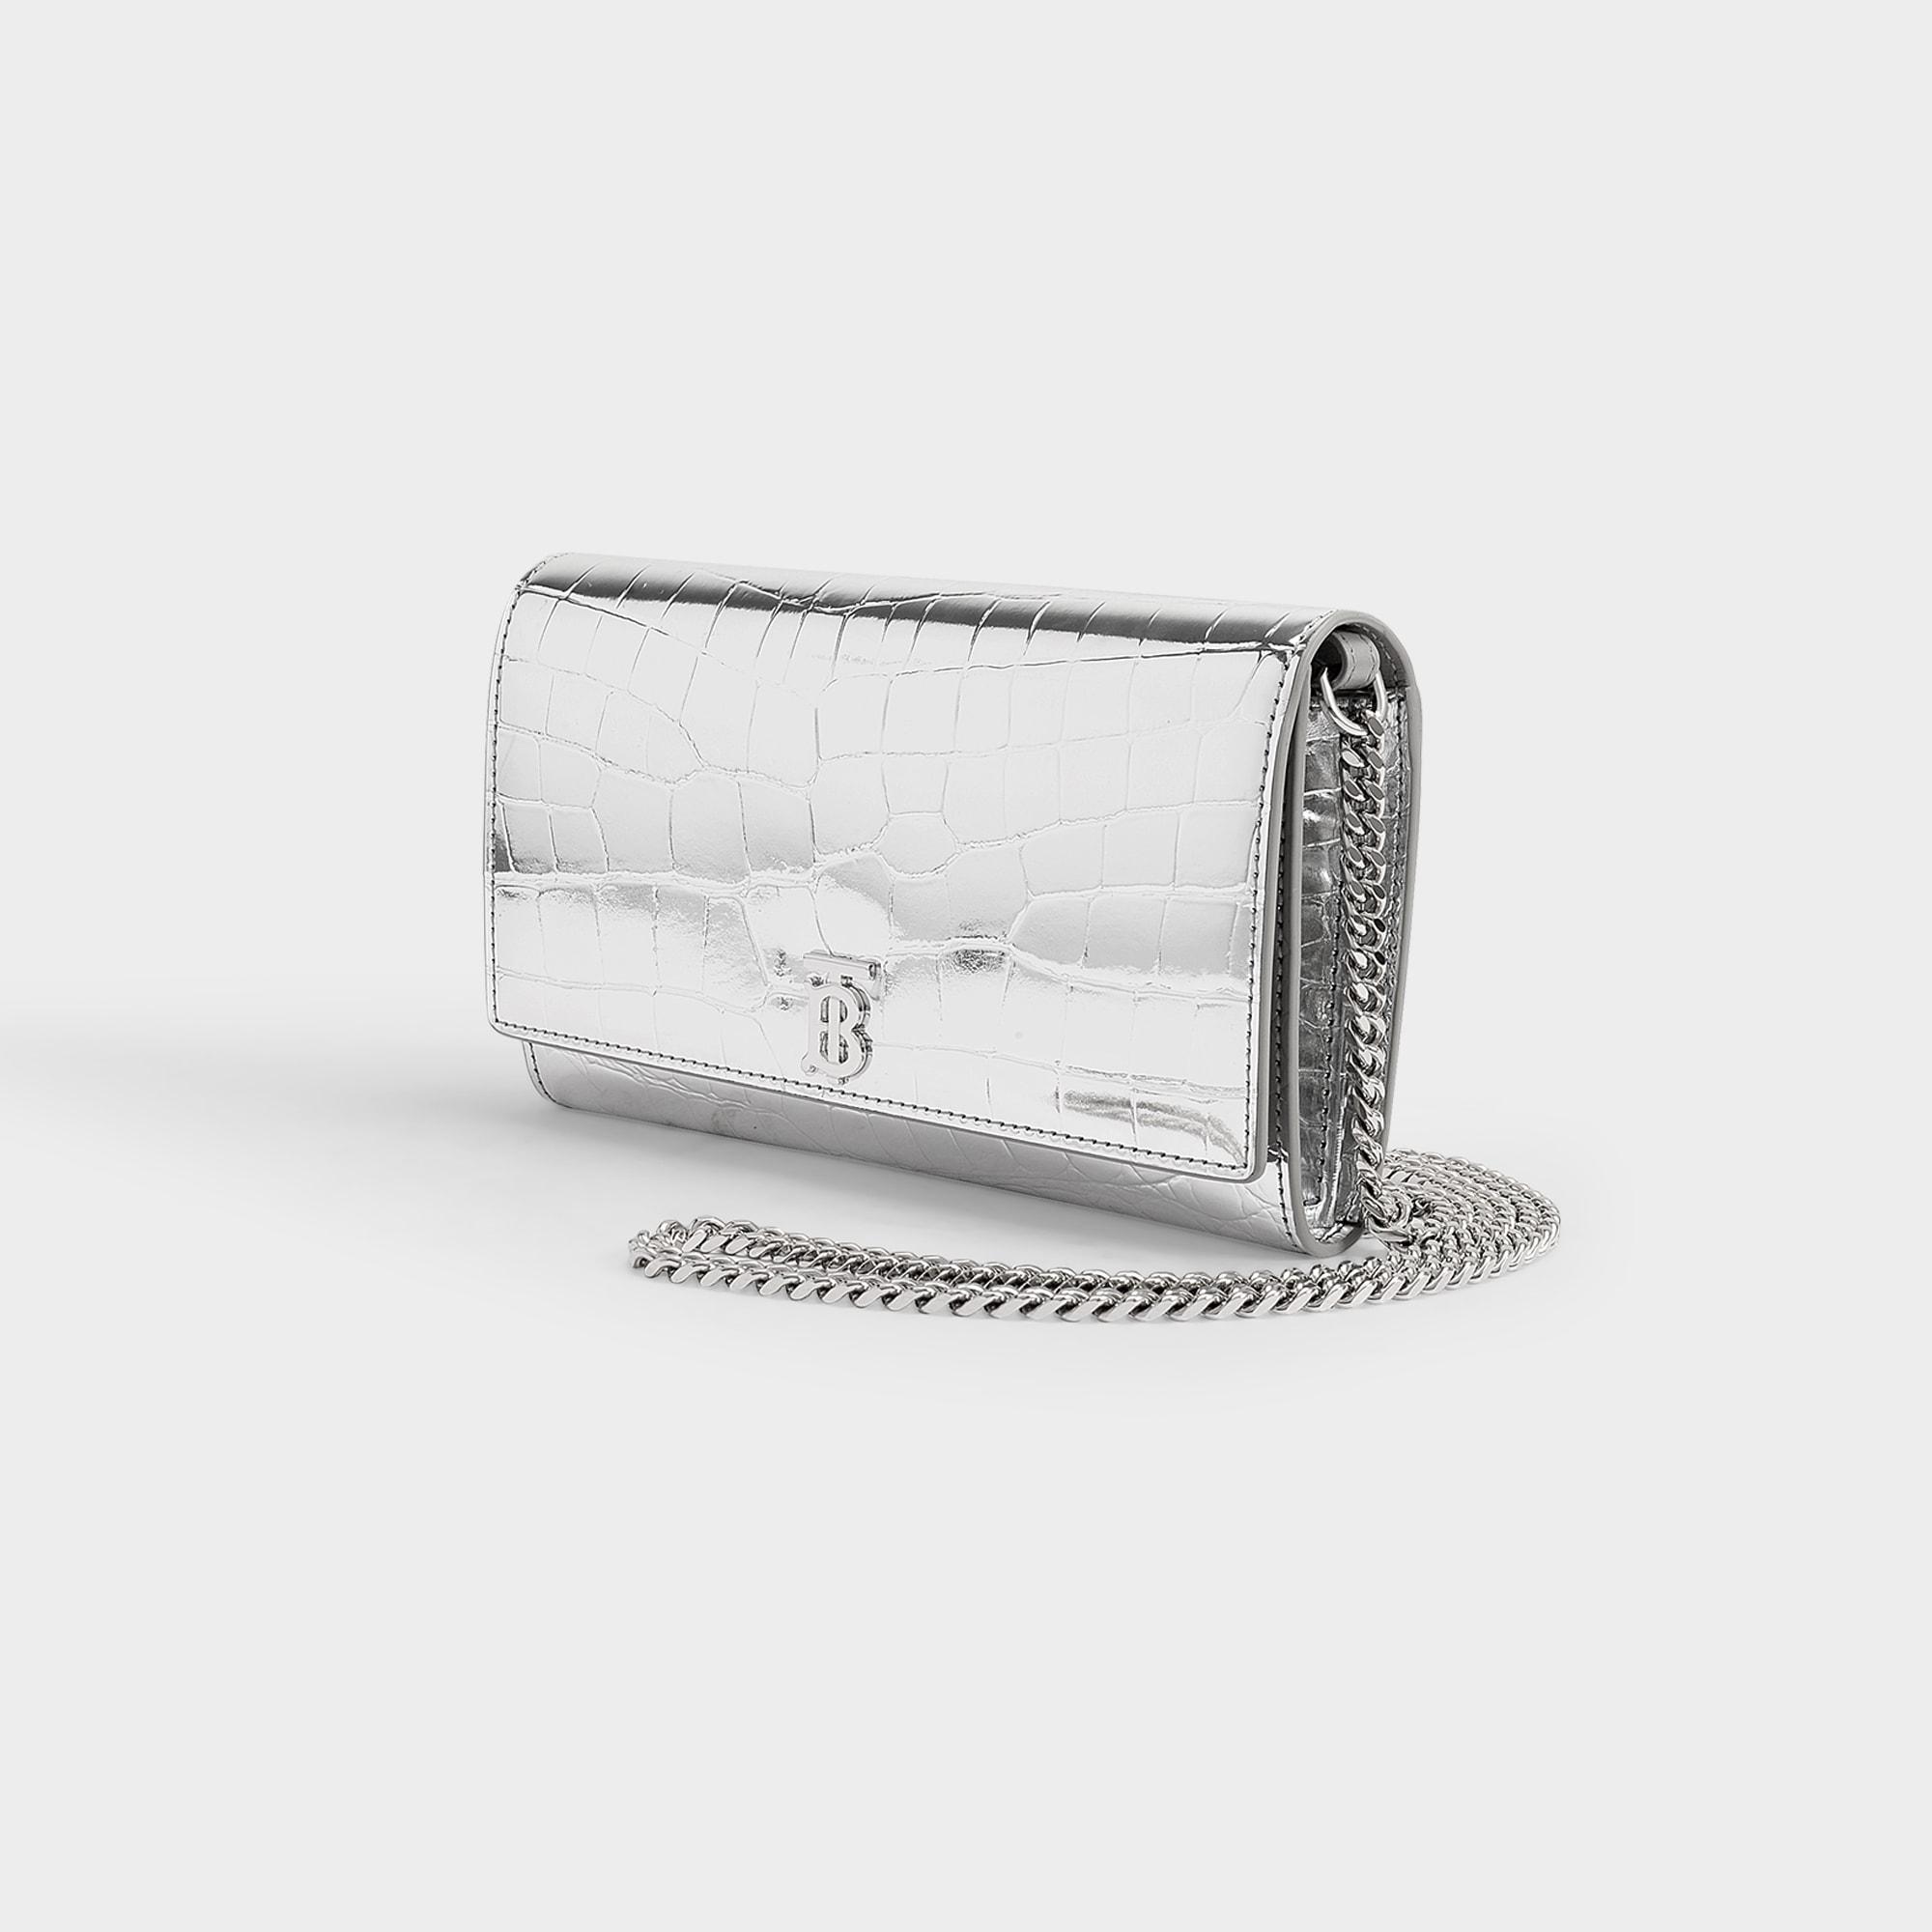 Burberry Hannah Clutch In Silver Croc Embossed Leather in Metallic